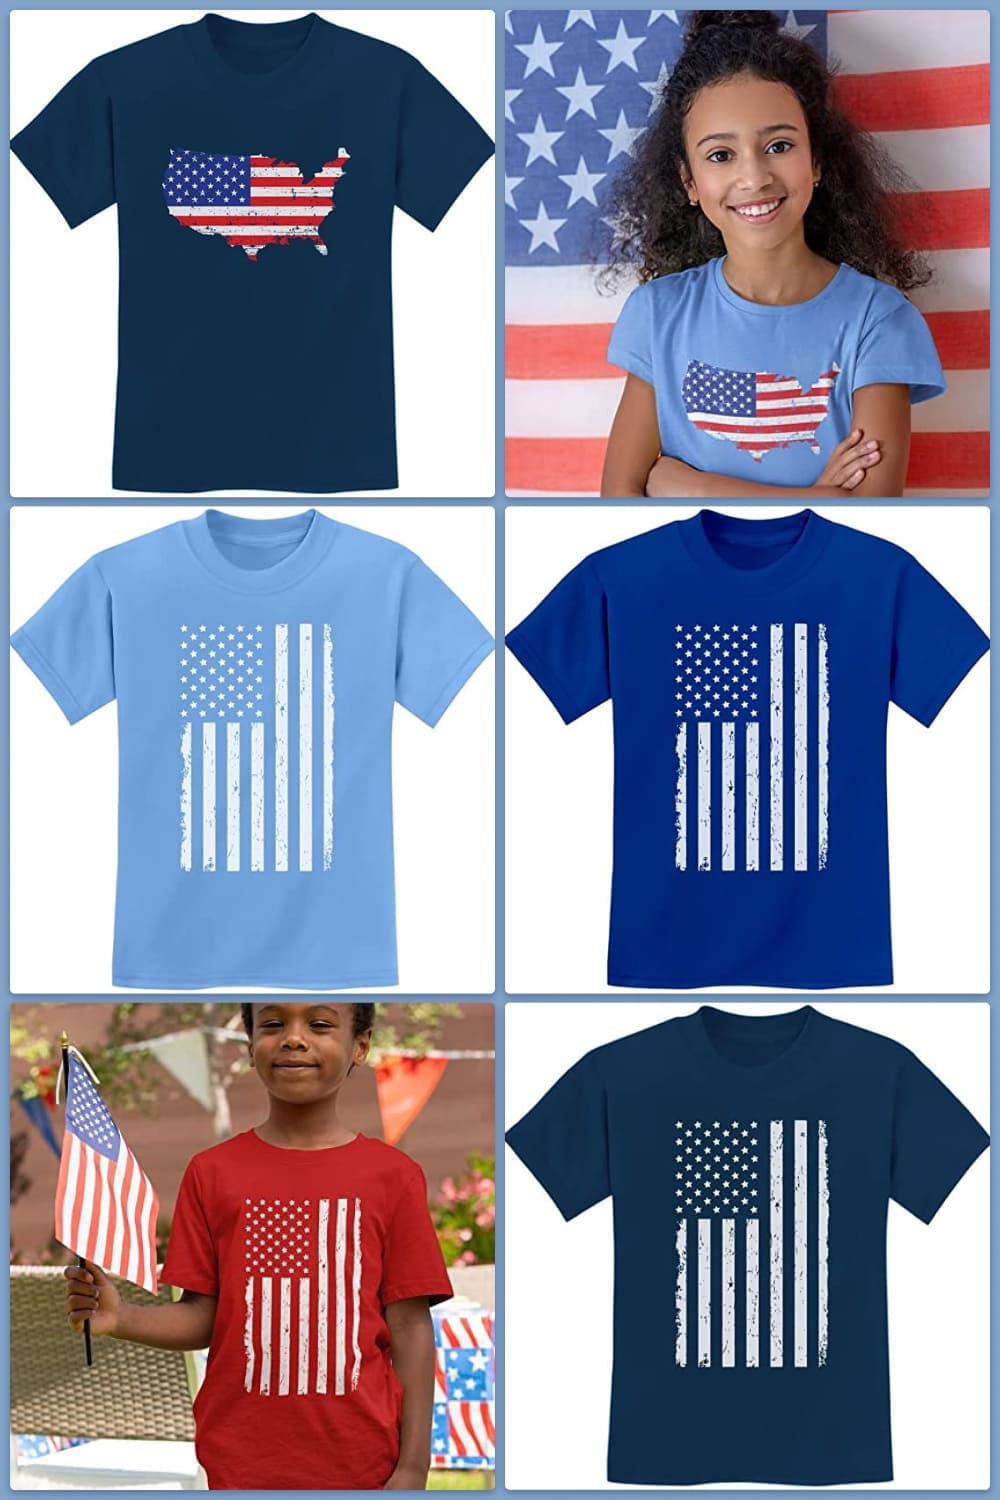 Collage of children's t-shirts with the American flag.